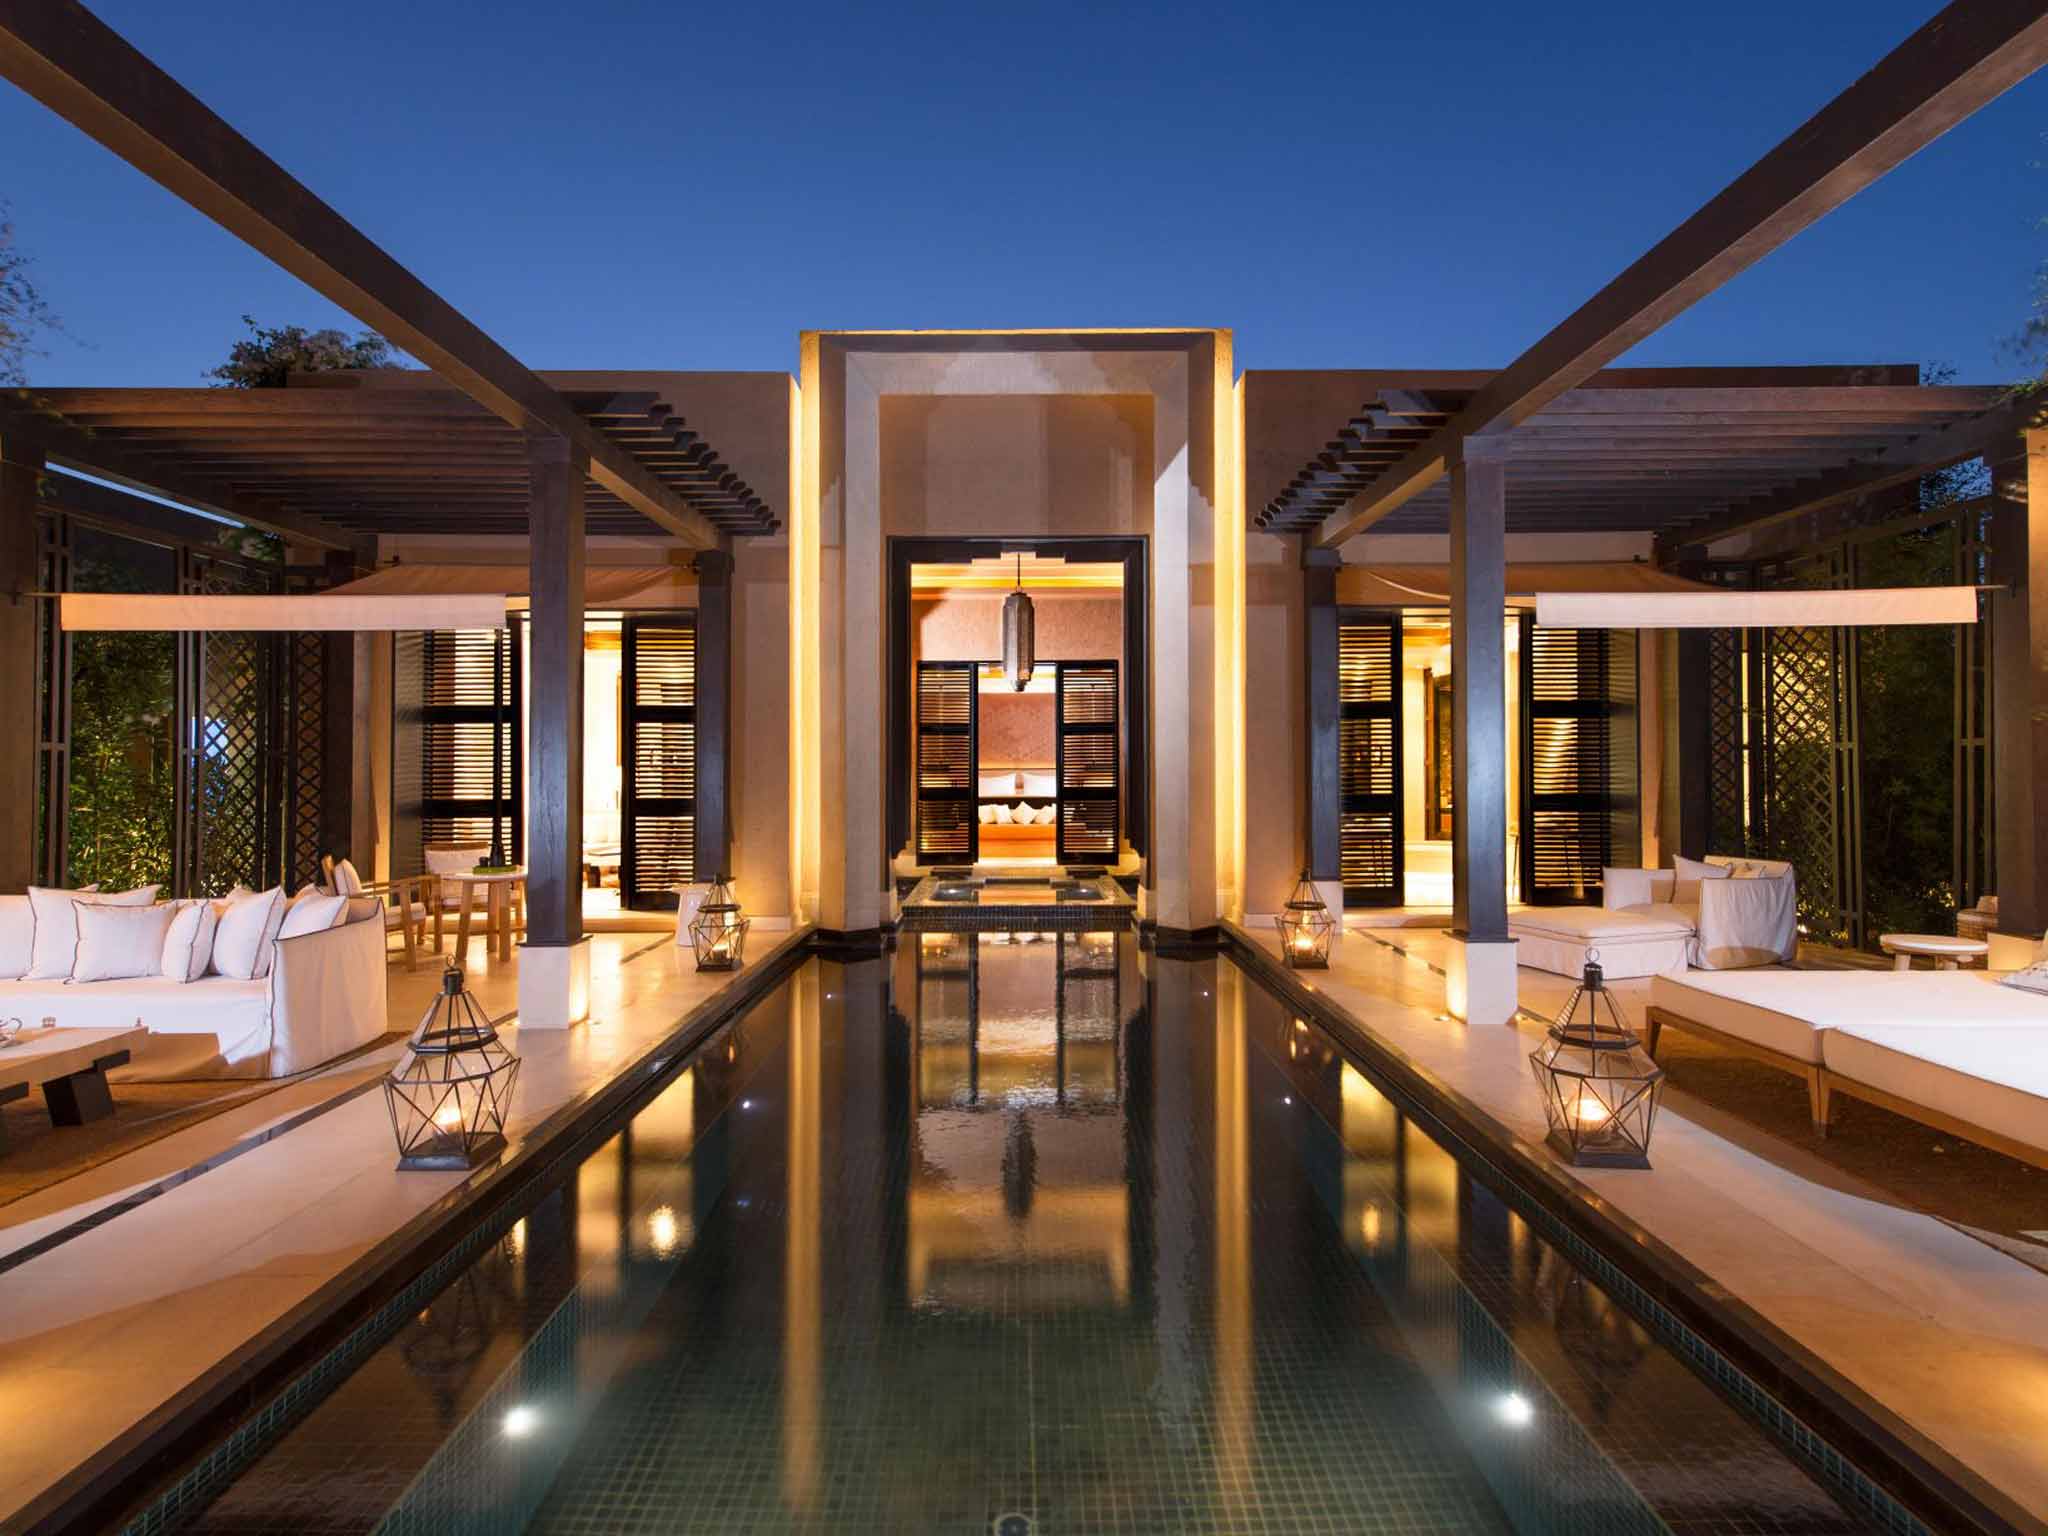 The opening date for the Mandarin Oriental in Marrakech has been moved back, but bookings are now being accepted from 18 June